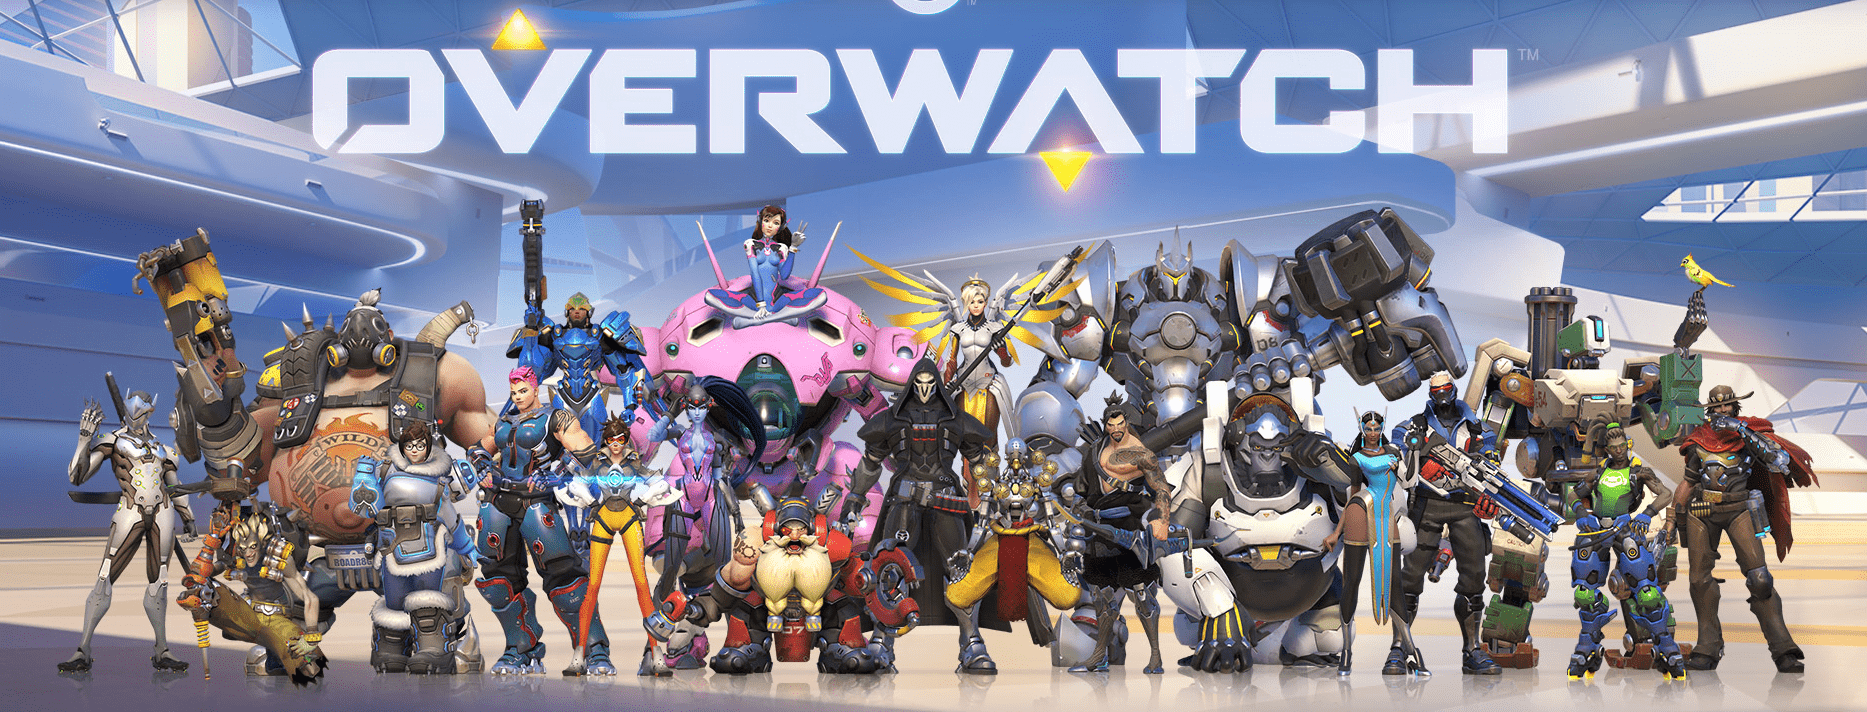 Overwatch Update Version 2.68 Full New Patch Notes PS4 Full Details Here 2019